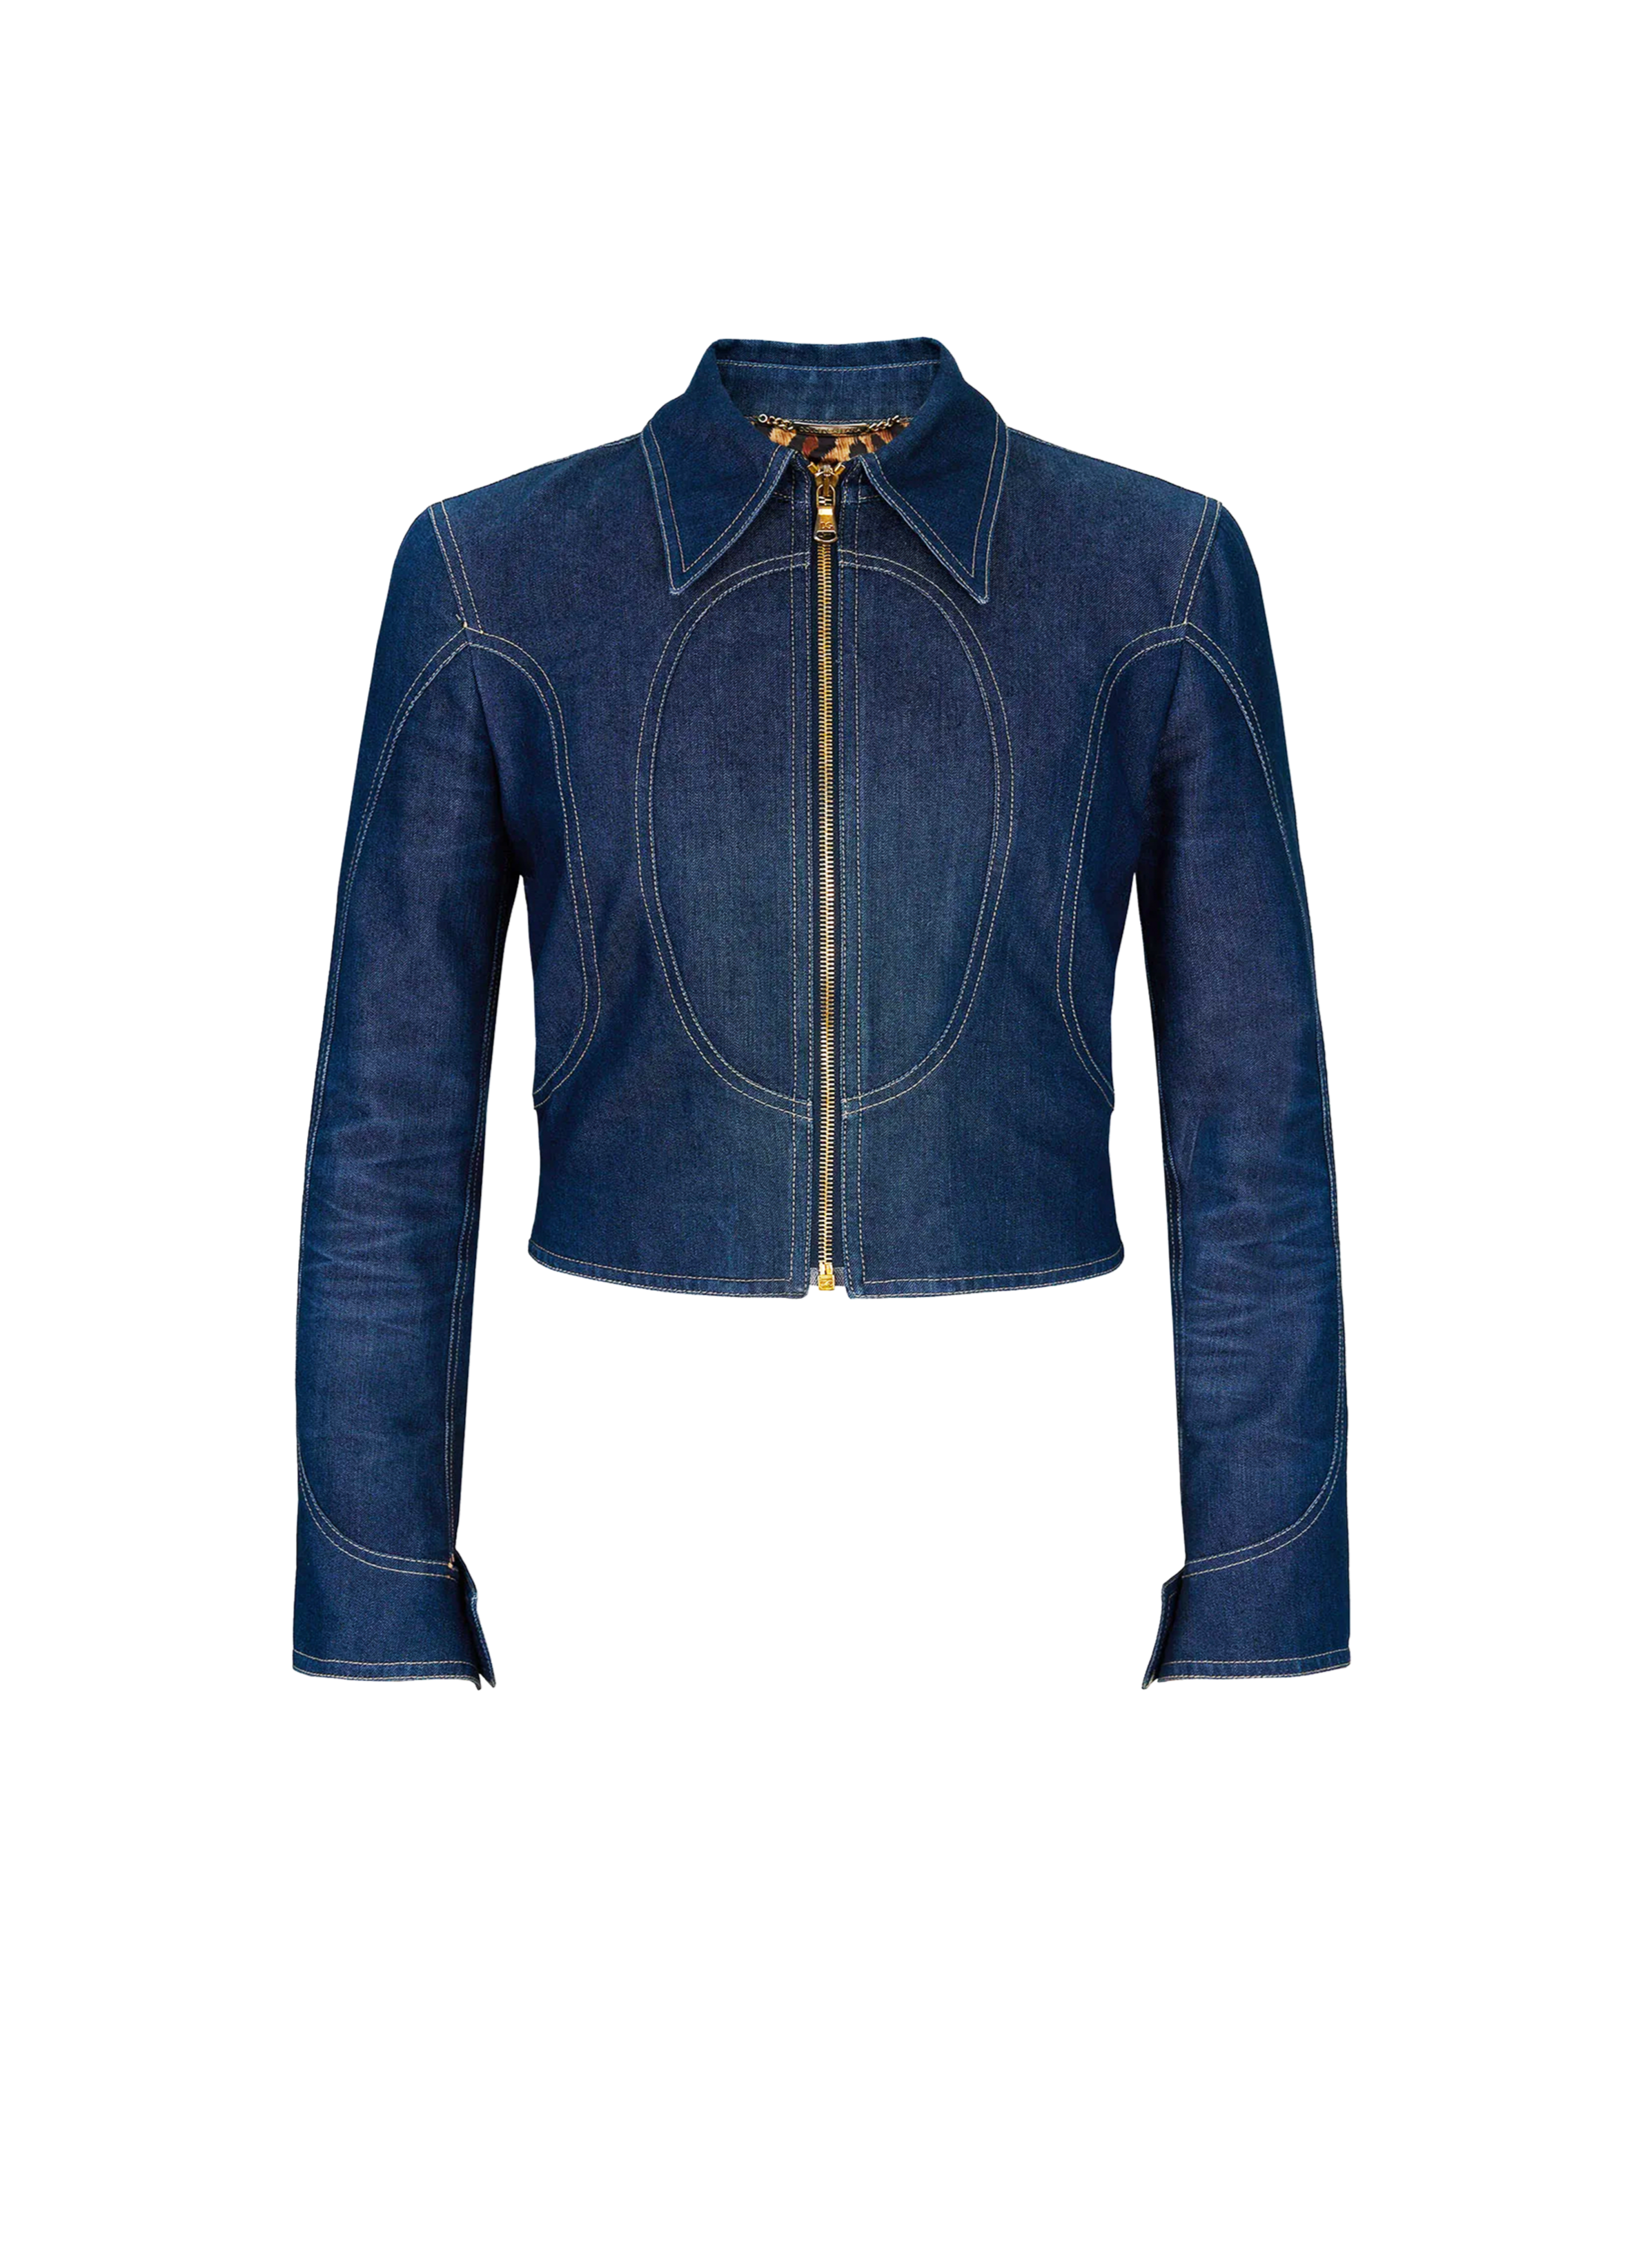 Dolce and Gabbana Spring 2001 Denim Jacket with a Golden Buckle